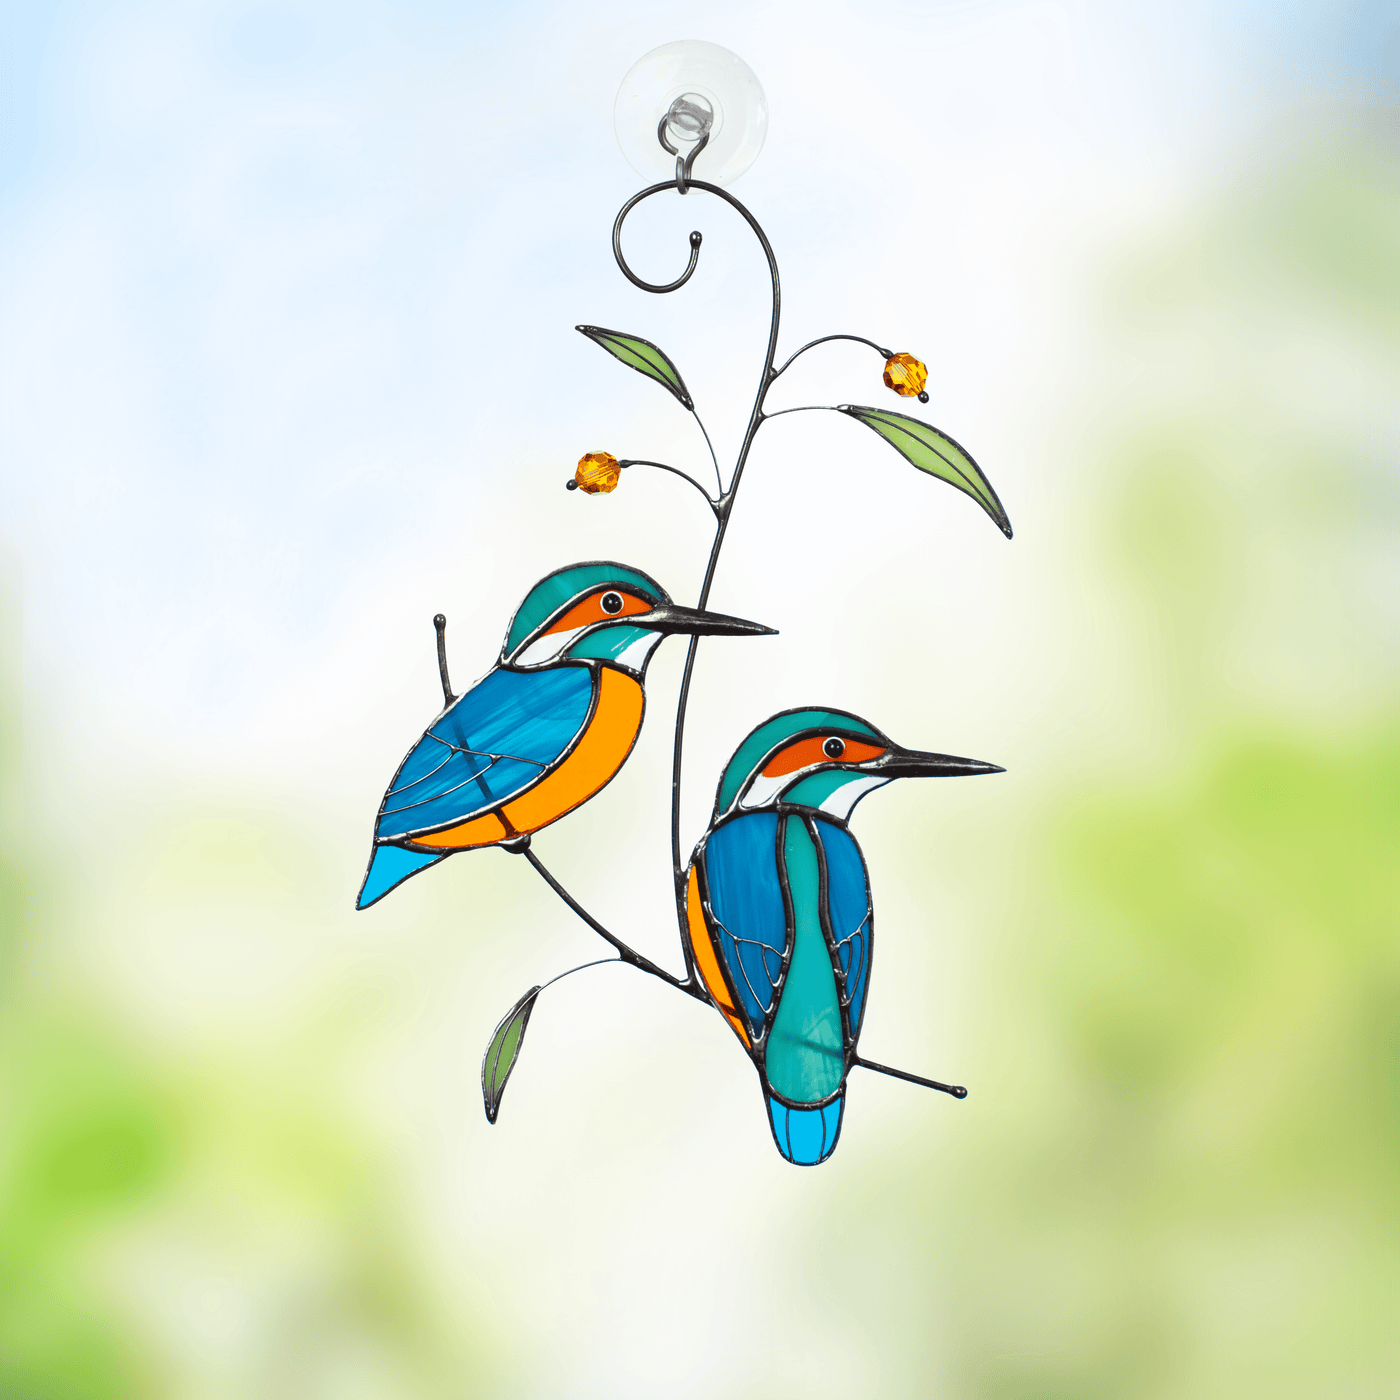 Kingfishers sitting on the branch with leaves and berries window hanging of stained glass